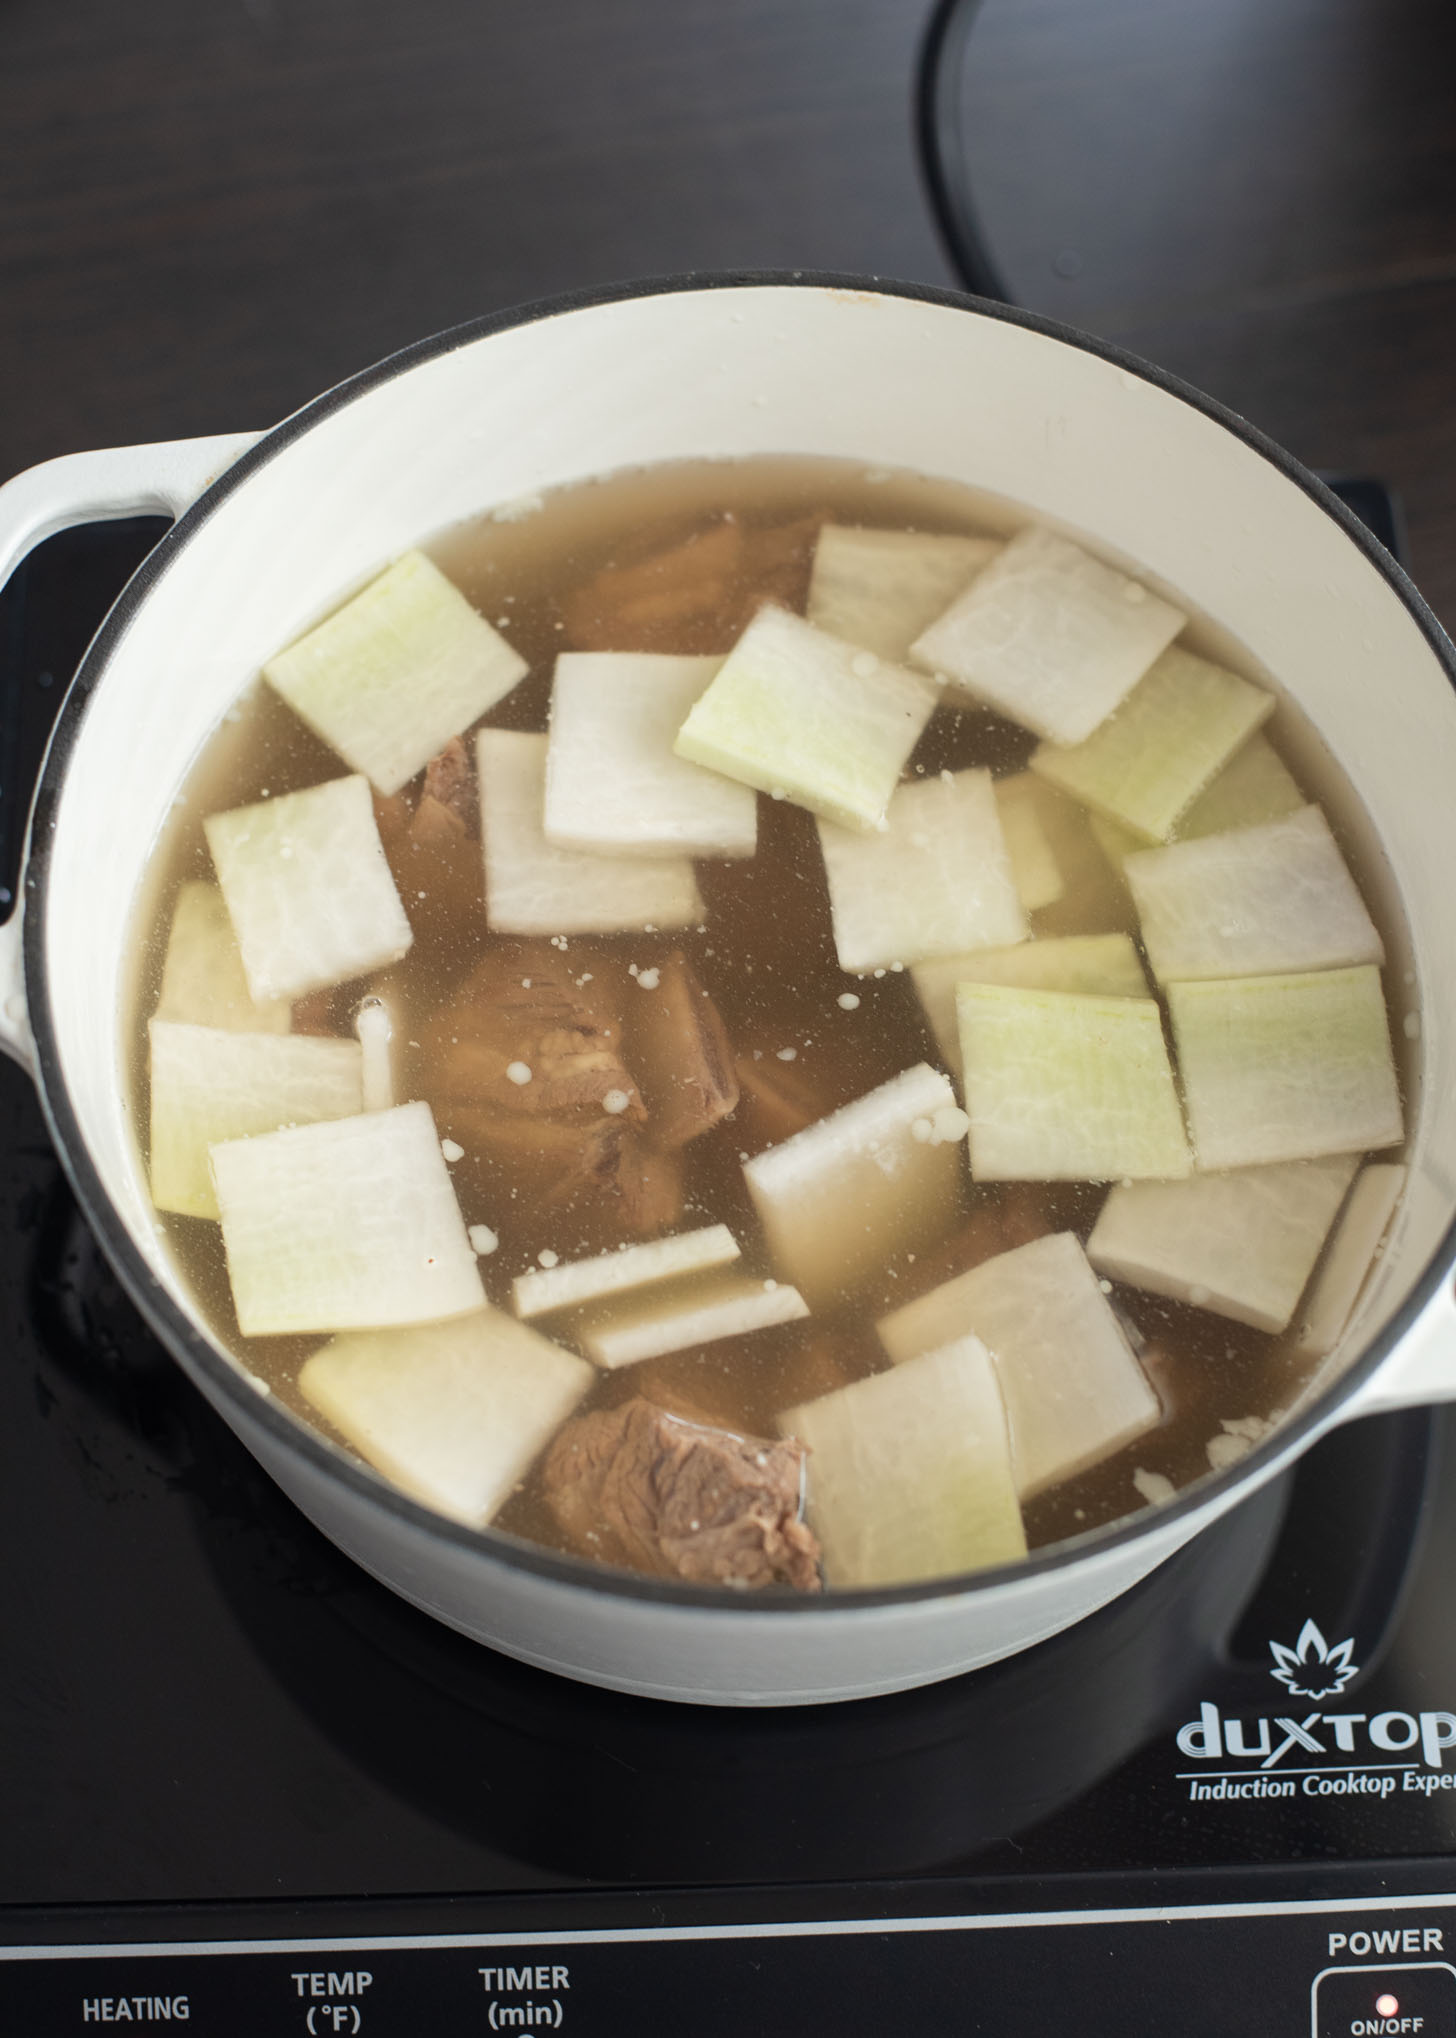 Thin radish slices are added to heat with galbitang short ribs in a pot.